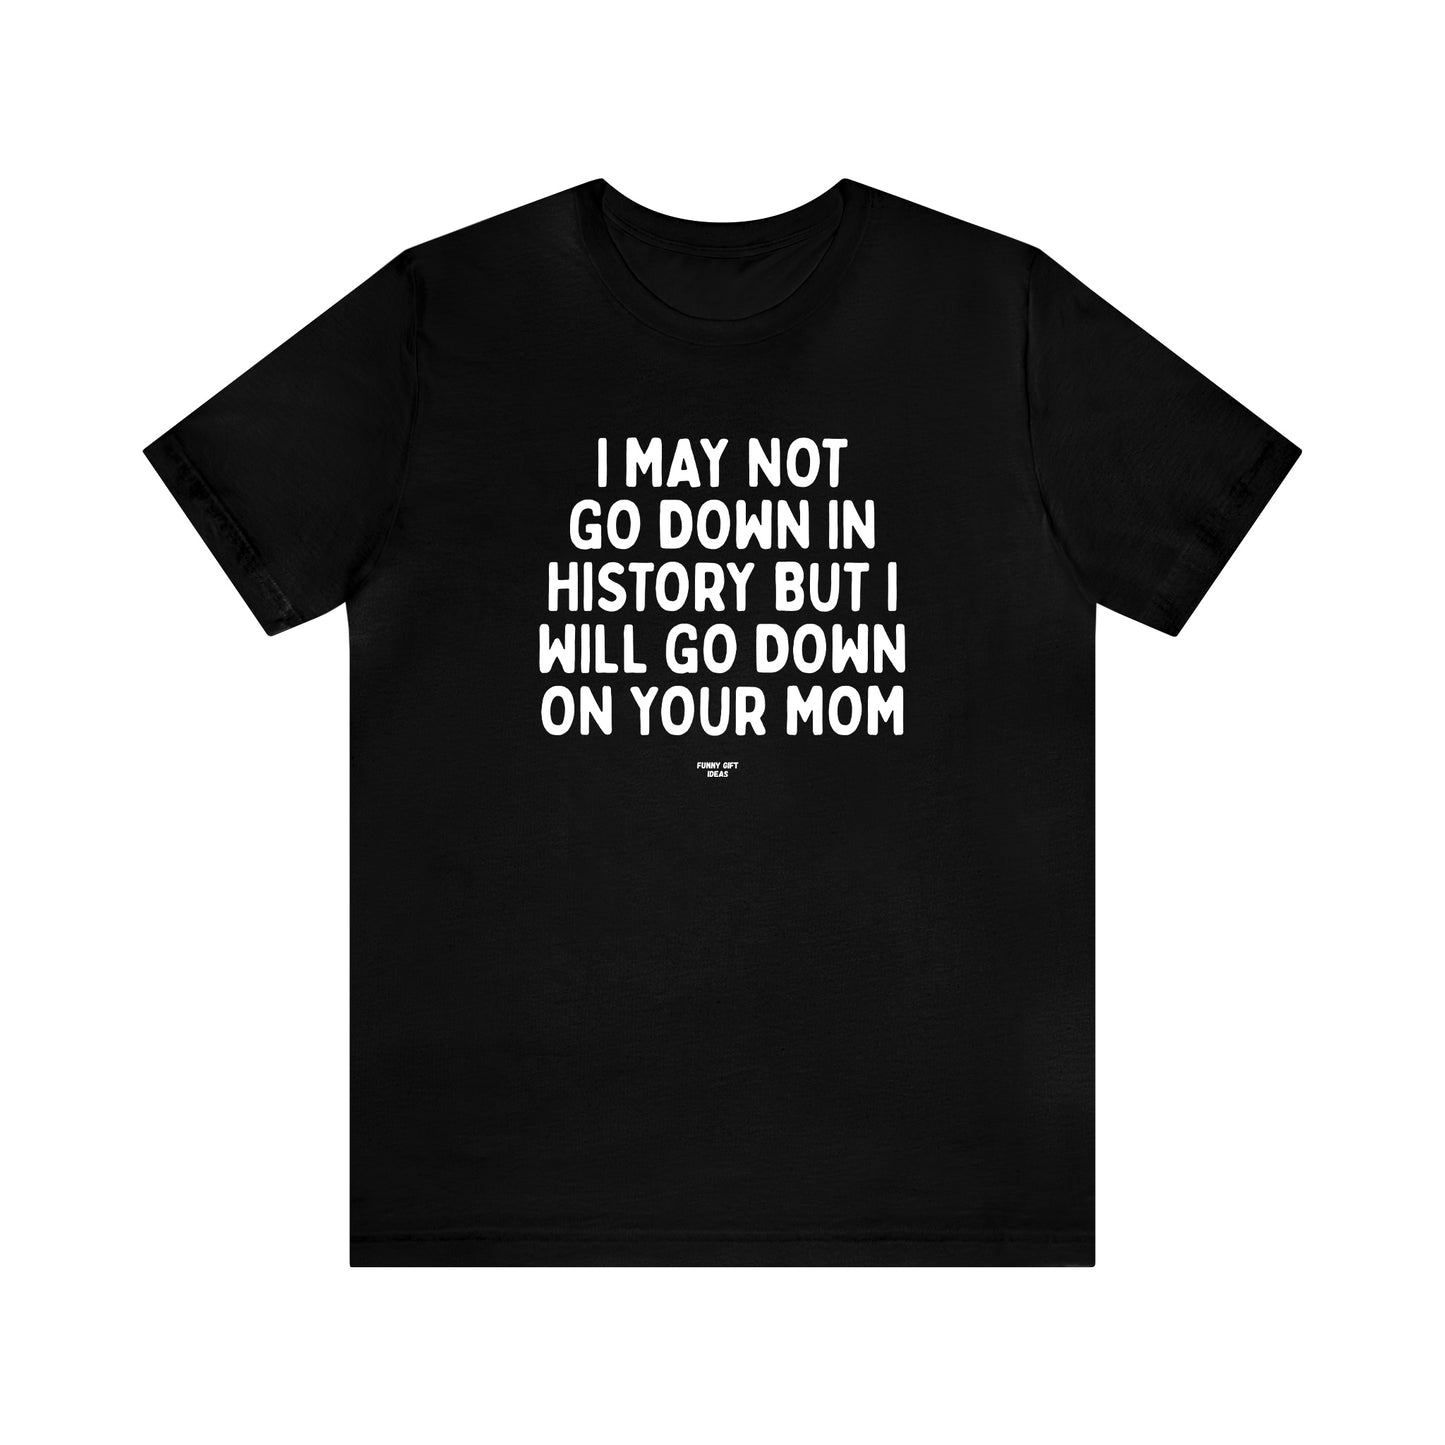 Mens T Shirts - I May Not Go Down in History but I Will Go Down on Your Mom - Funny Men T Shirts